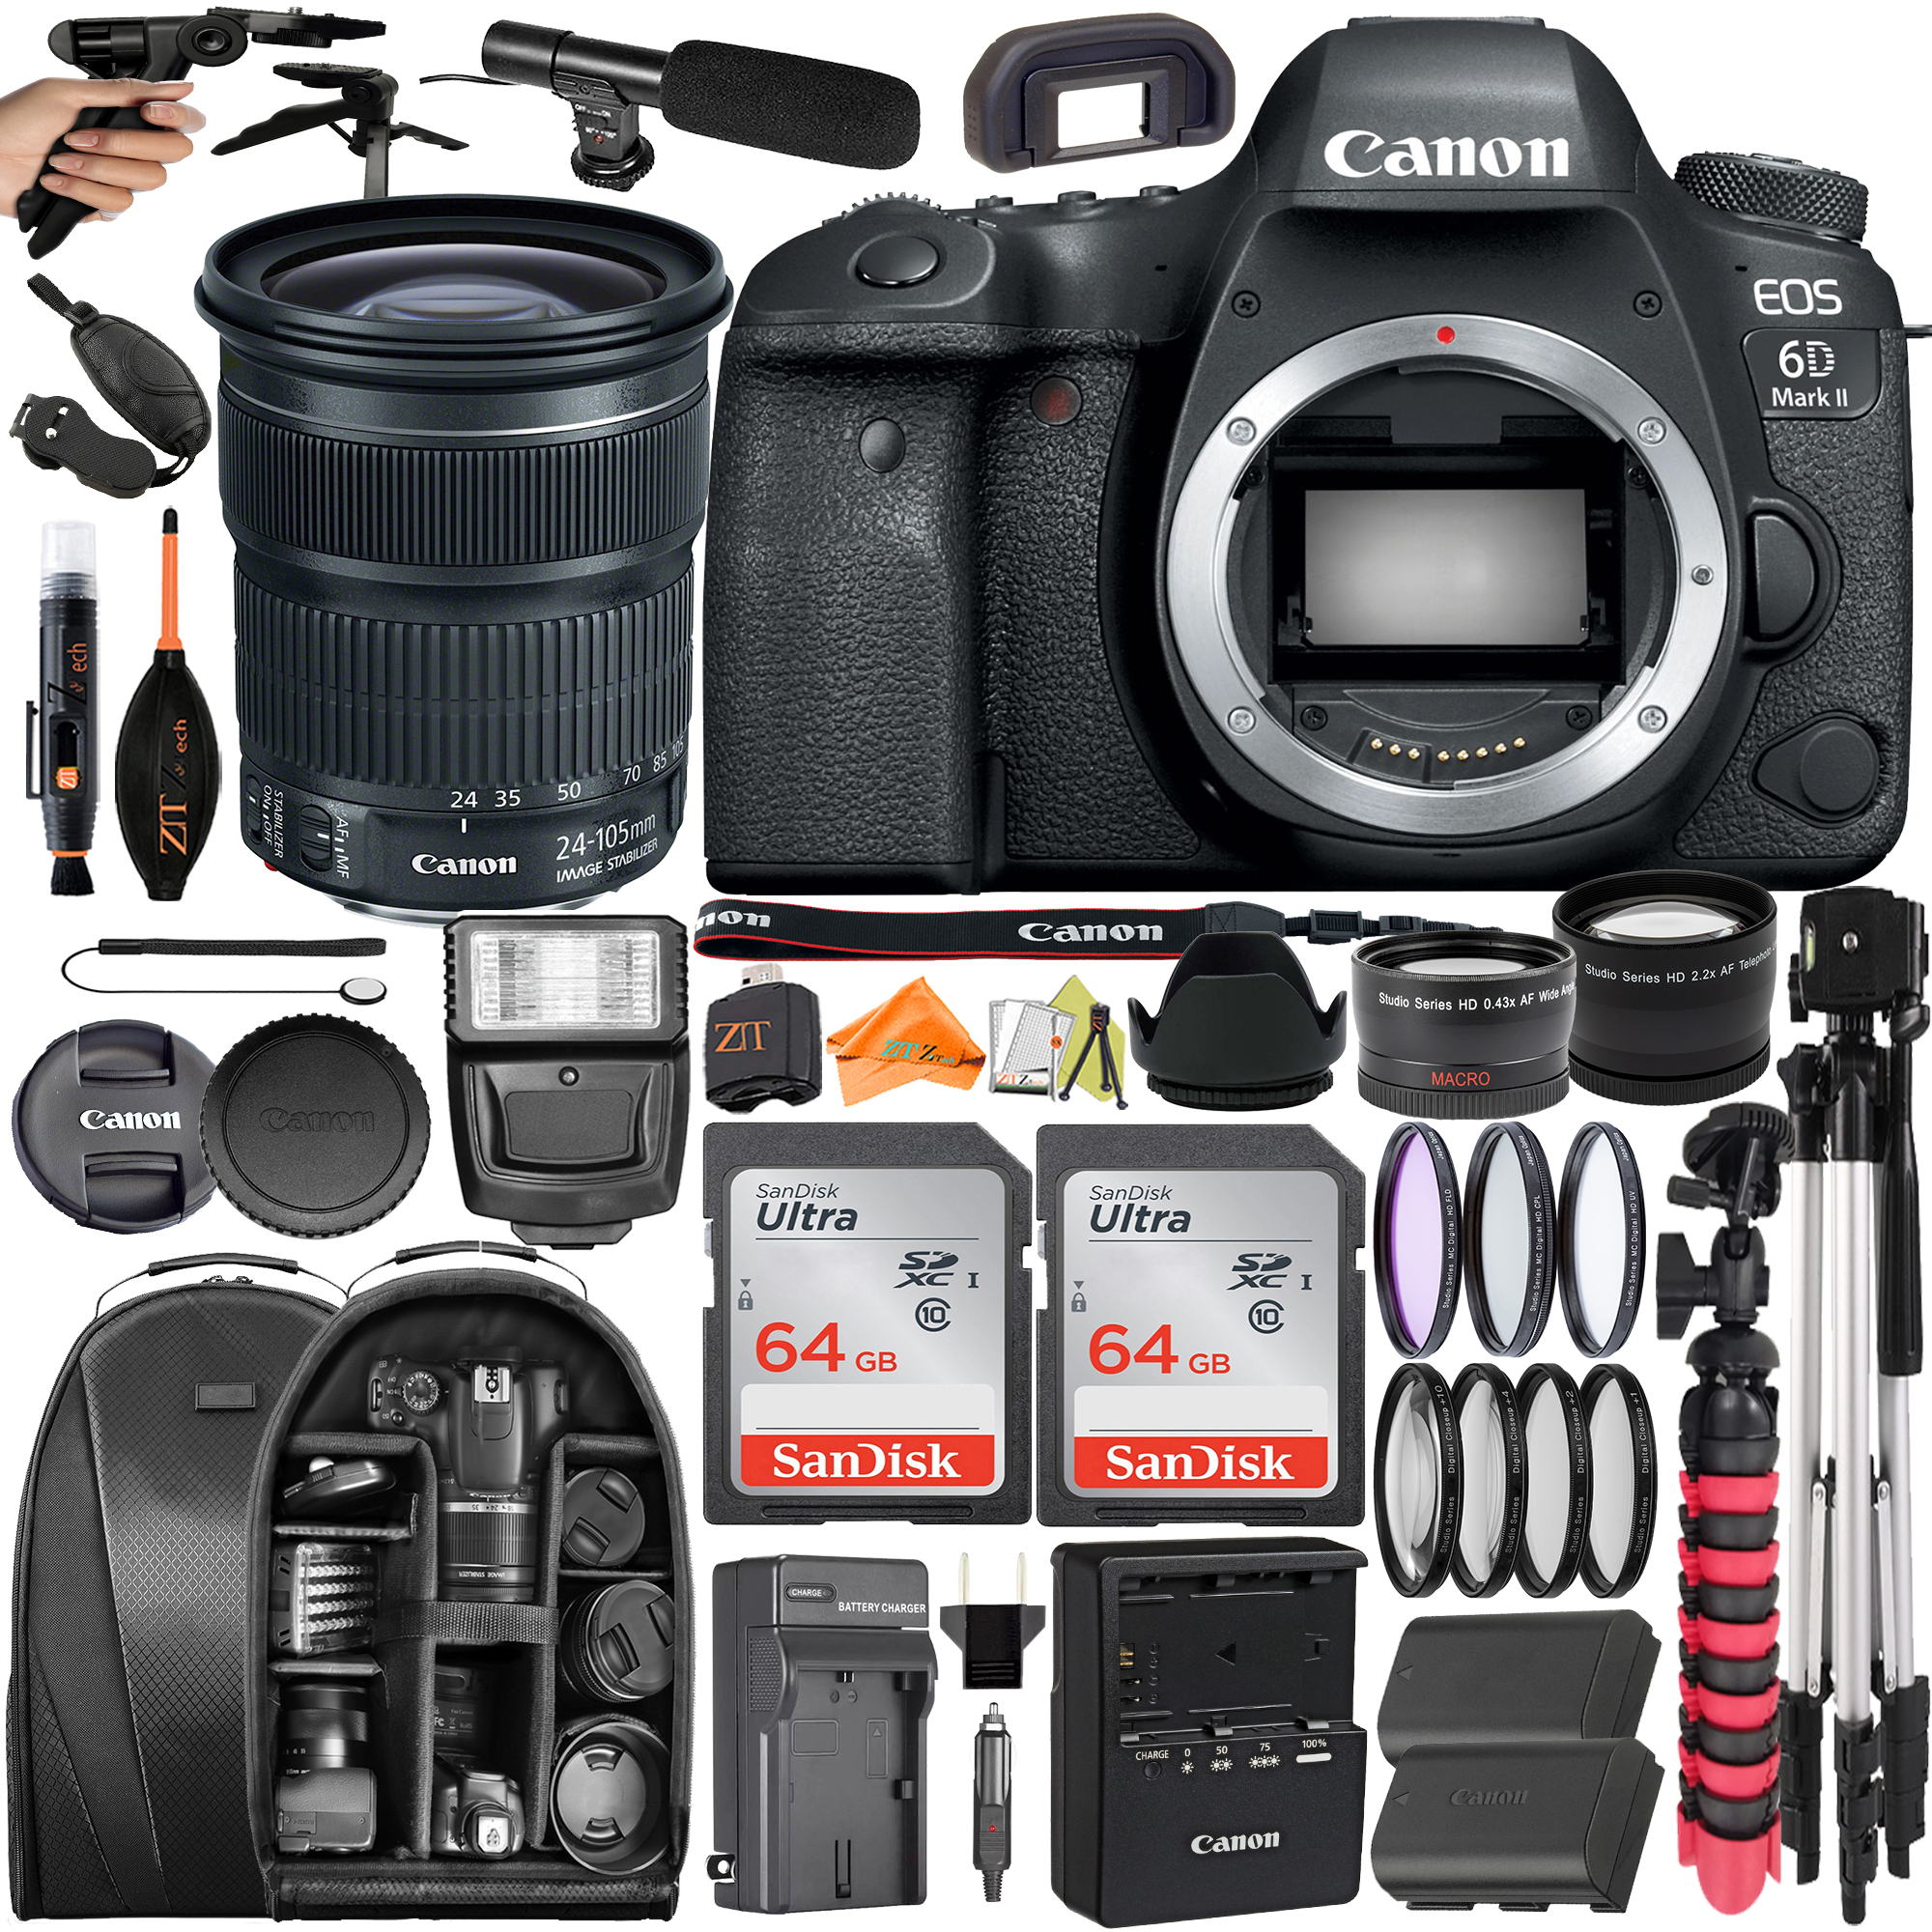 Canon EOS 6D Mark II DSLR Camera with 24-105mm Lens + SanDisk 64GB + Backpack Case + Telephoto + ZeeTech Accessory Bundle